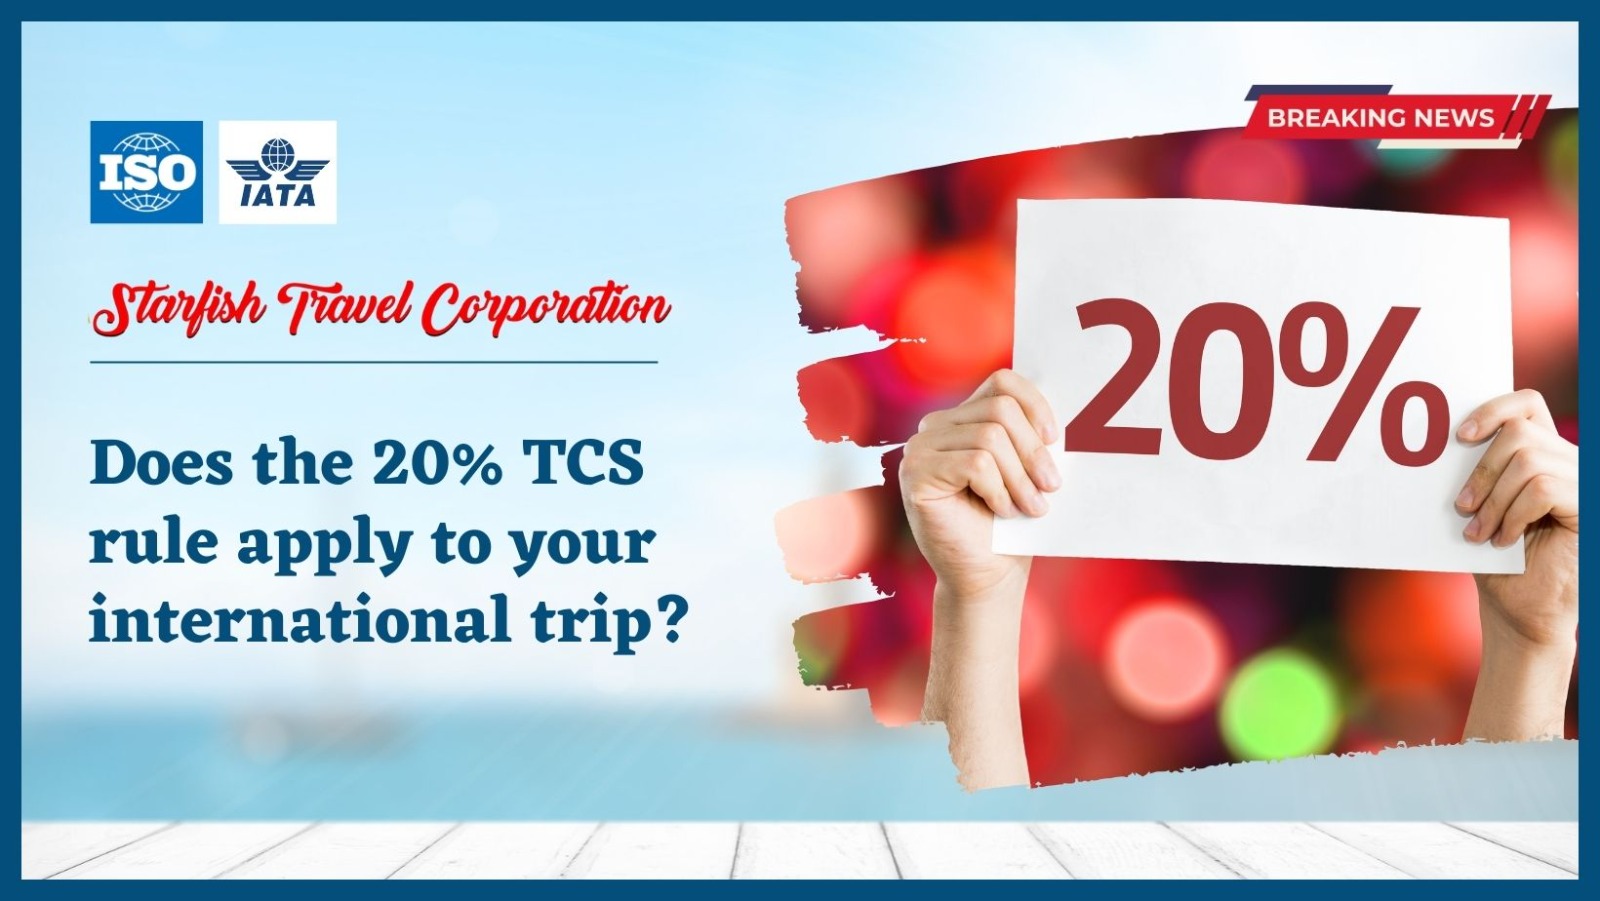 Does the 20% TCS rule apply to your international trip?